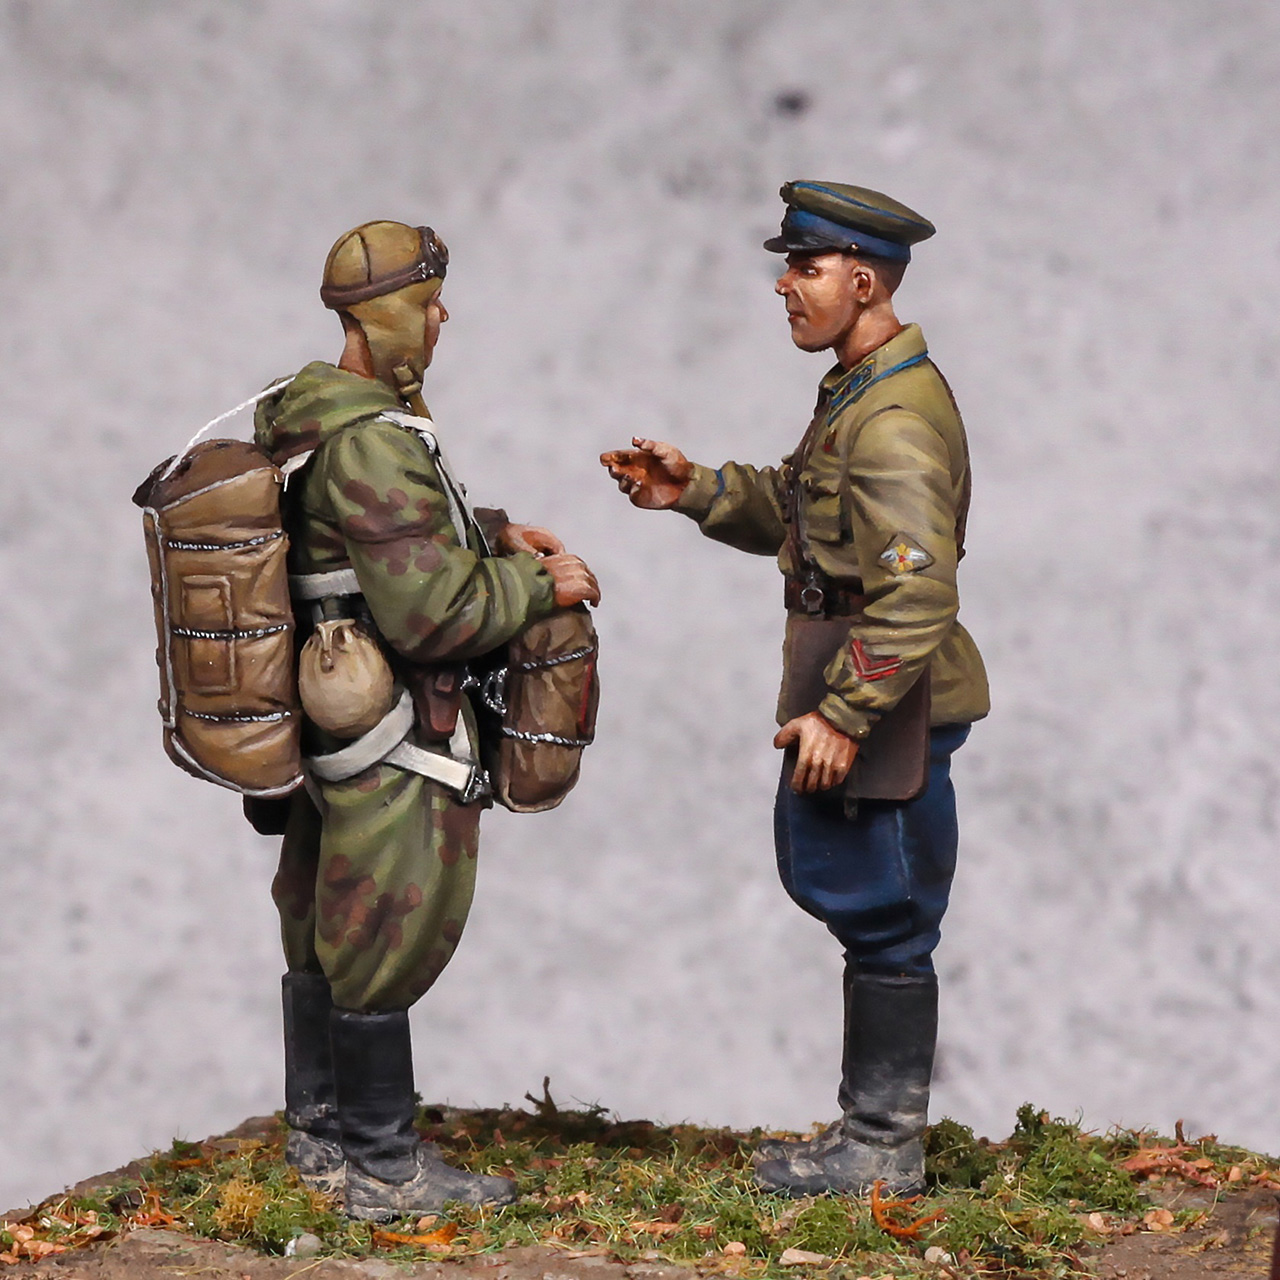 Figures: Red Army airborne commanders, 1941, photo #1